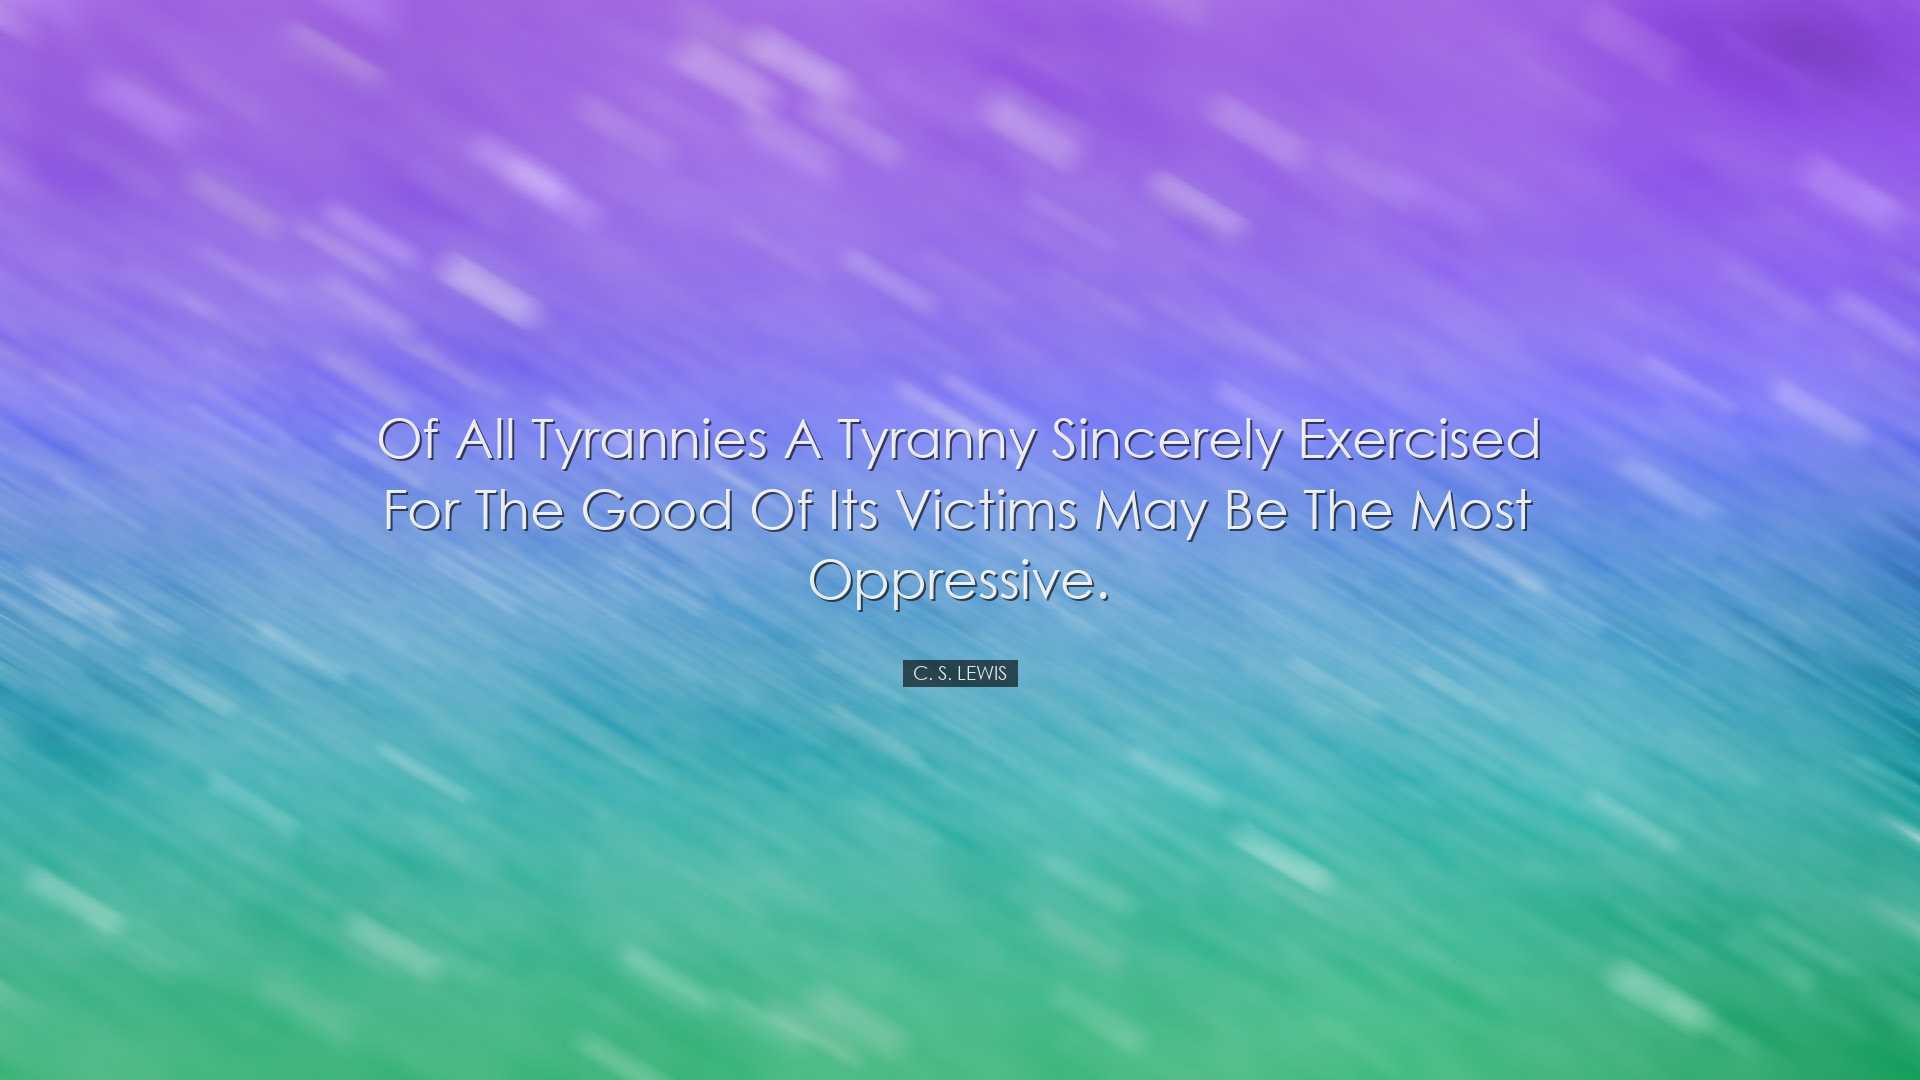 Of all tyrannies a tyranny sincerely exercised for the good of its